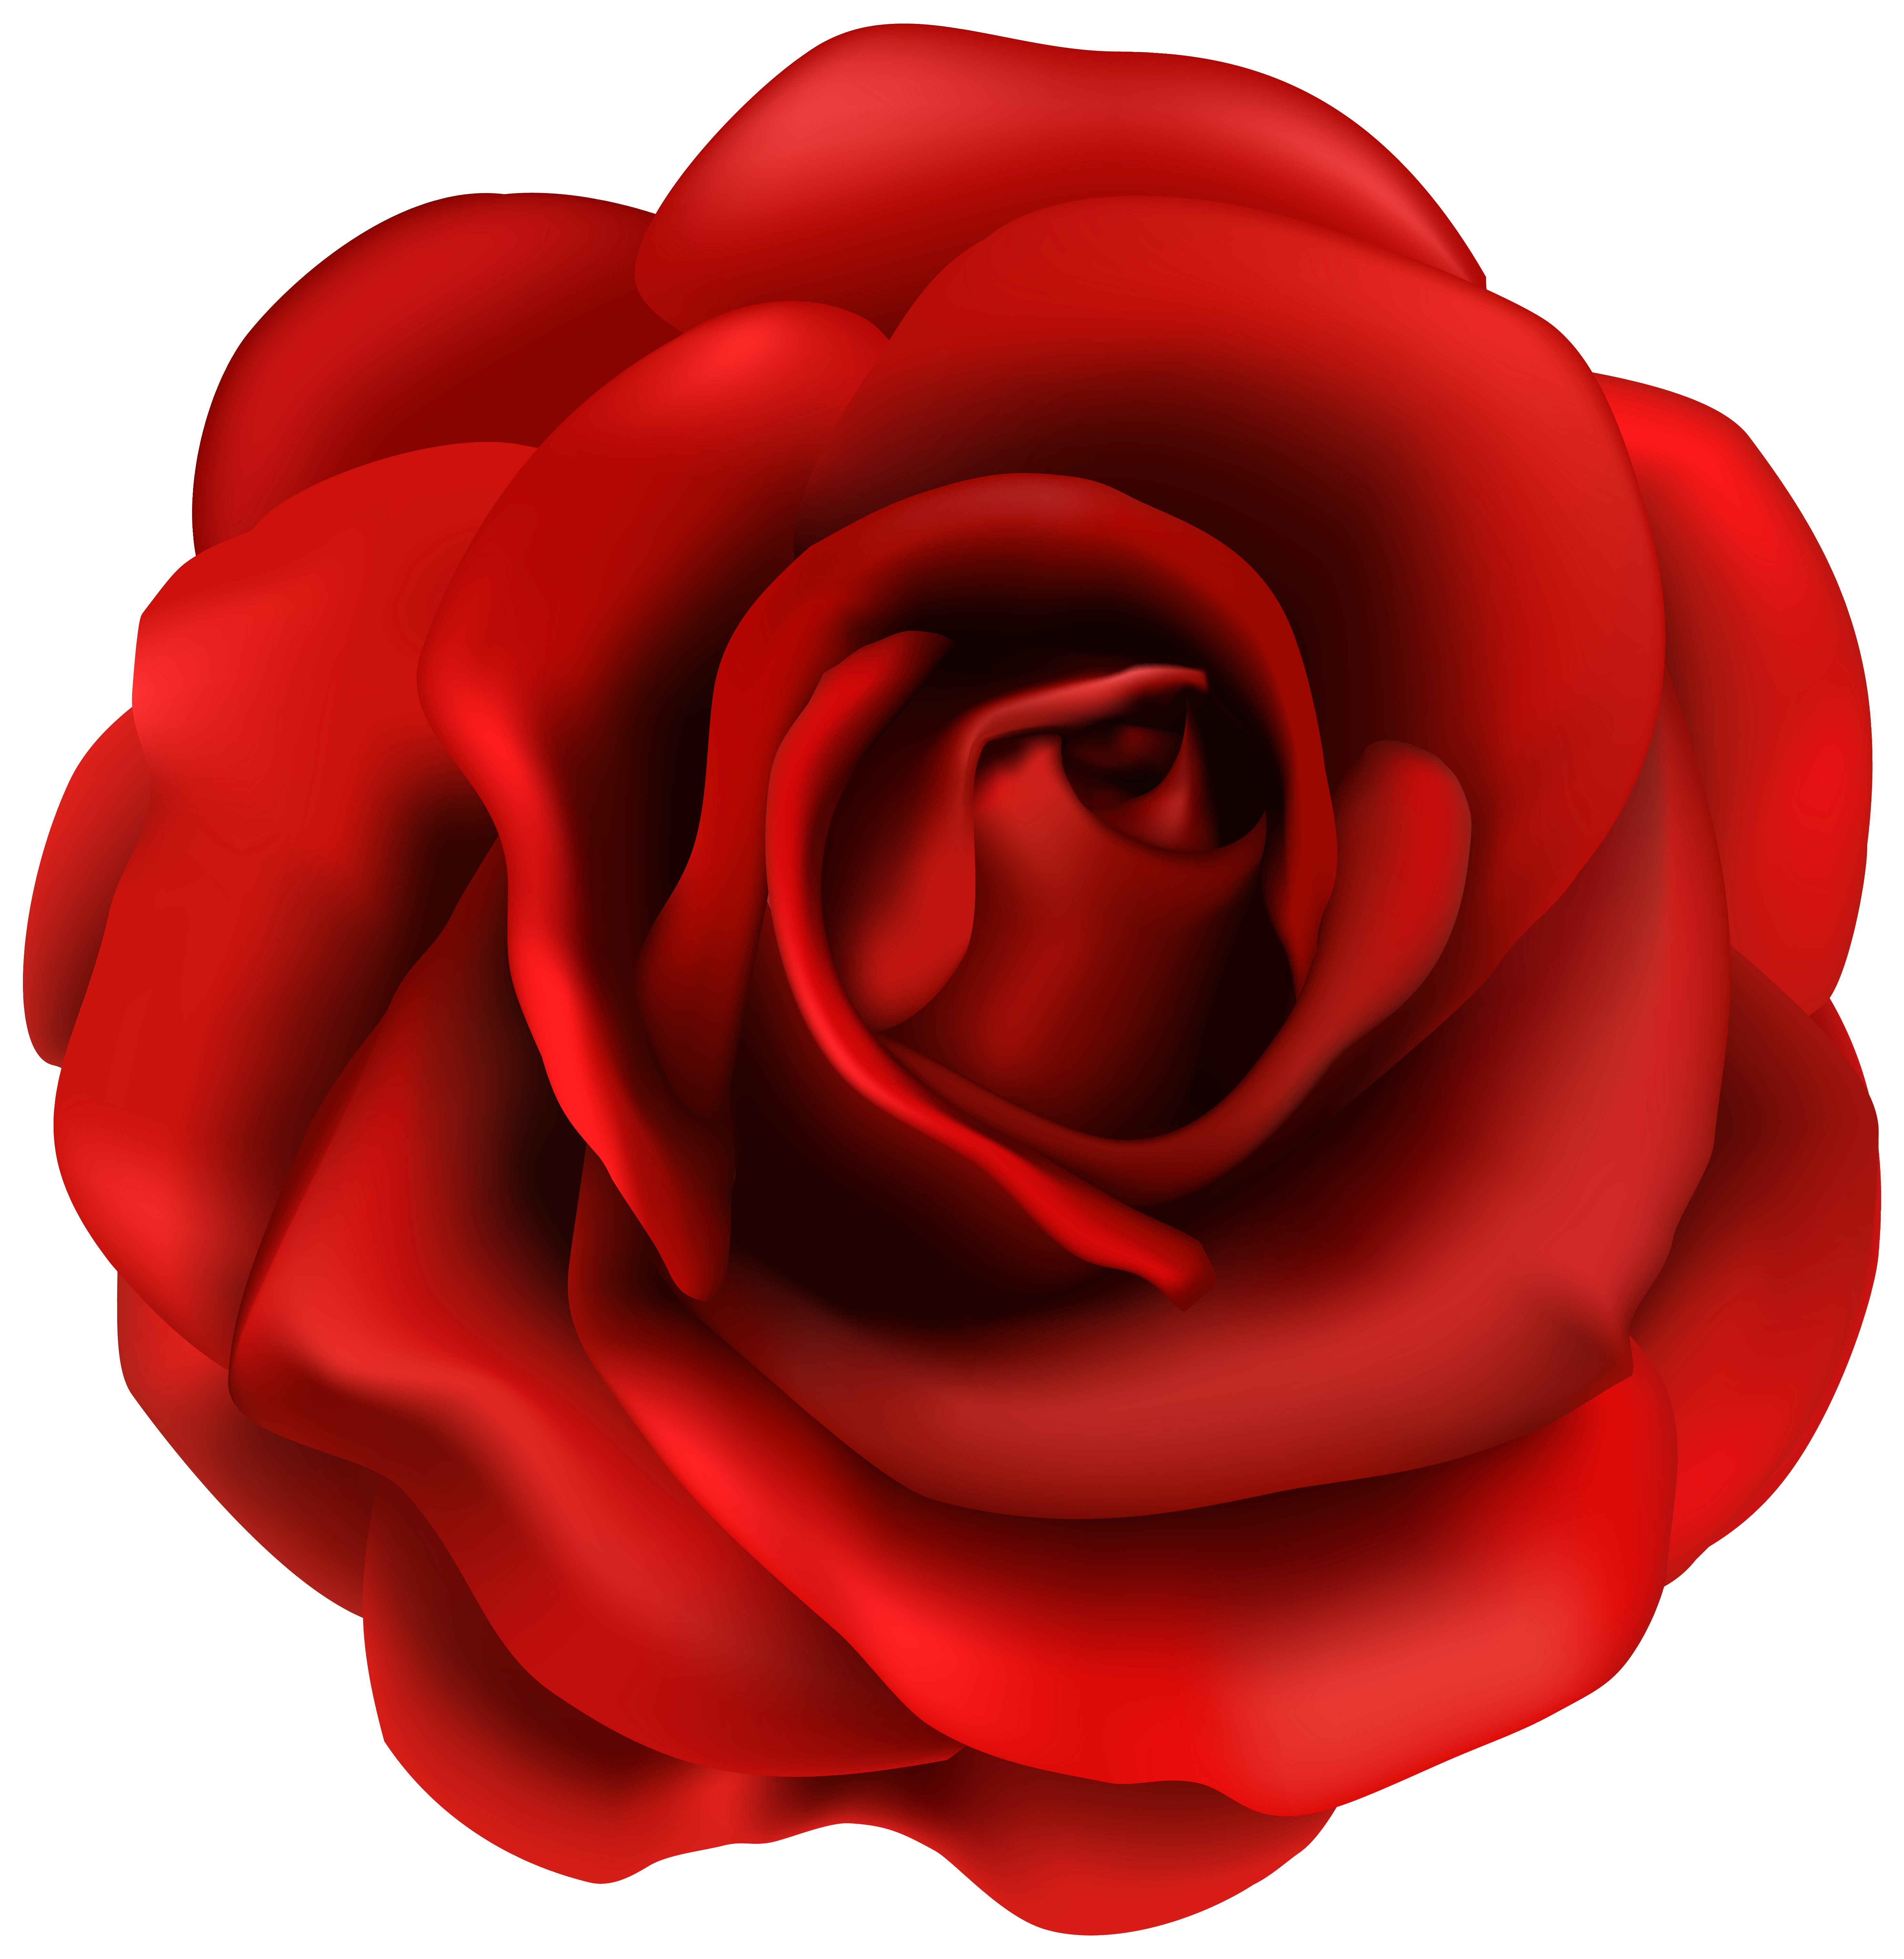 Red rose flower clipart image